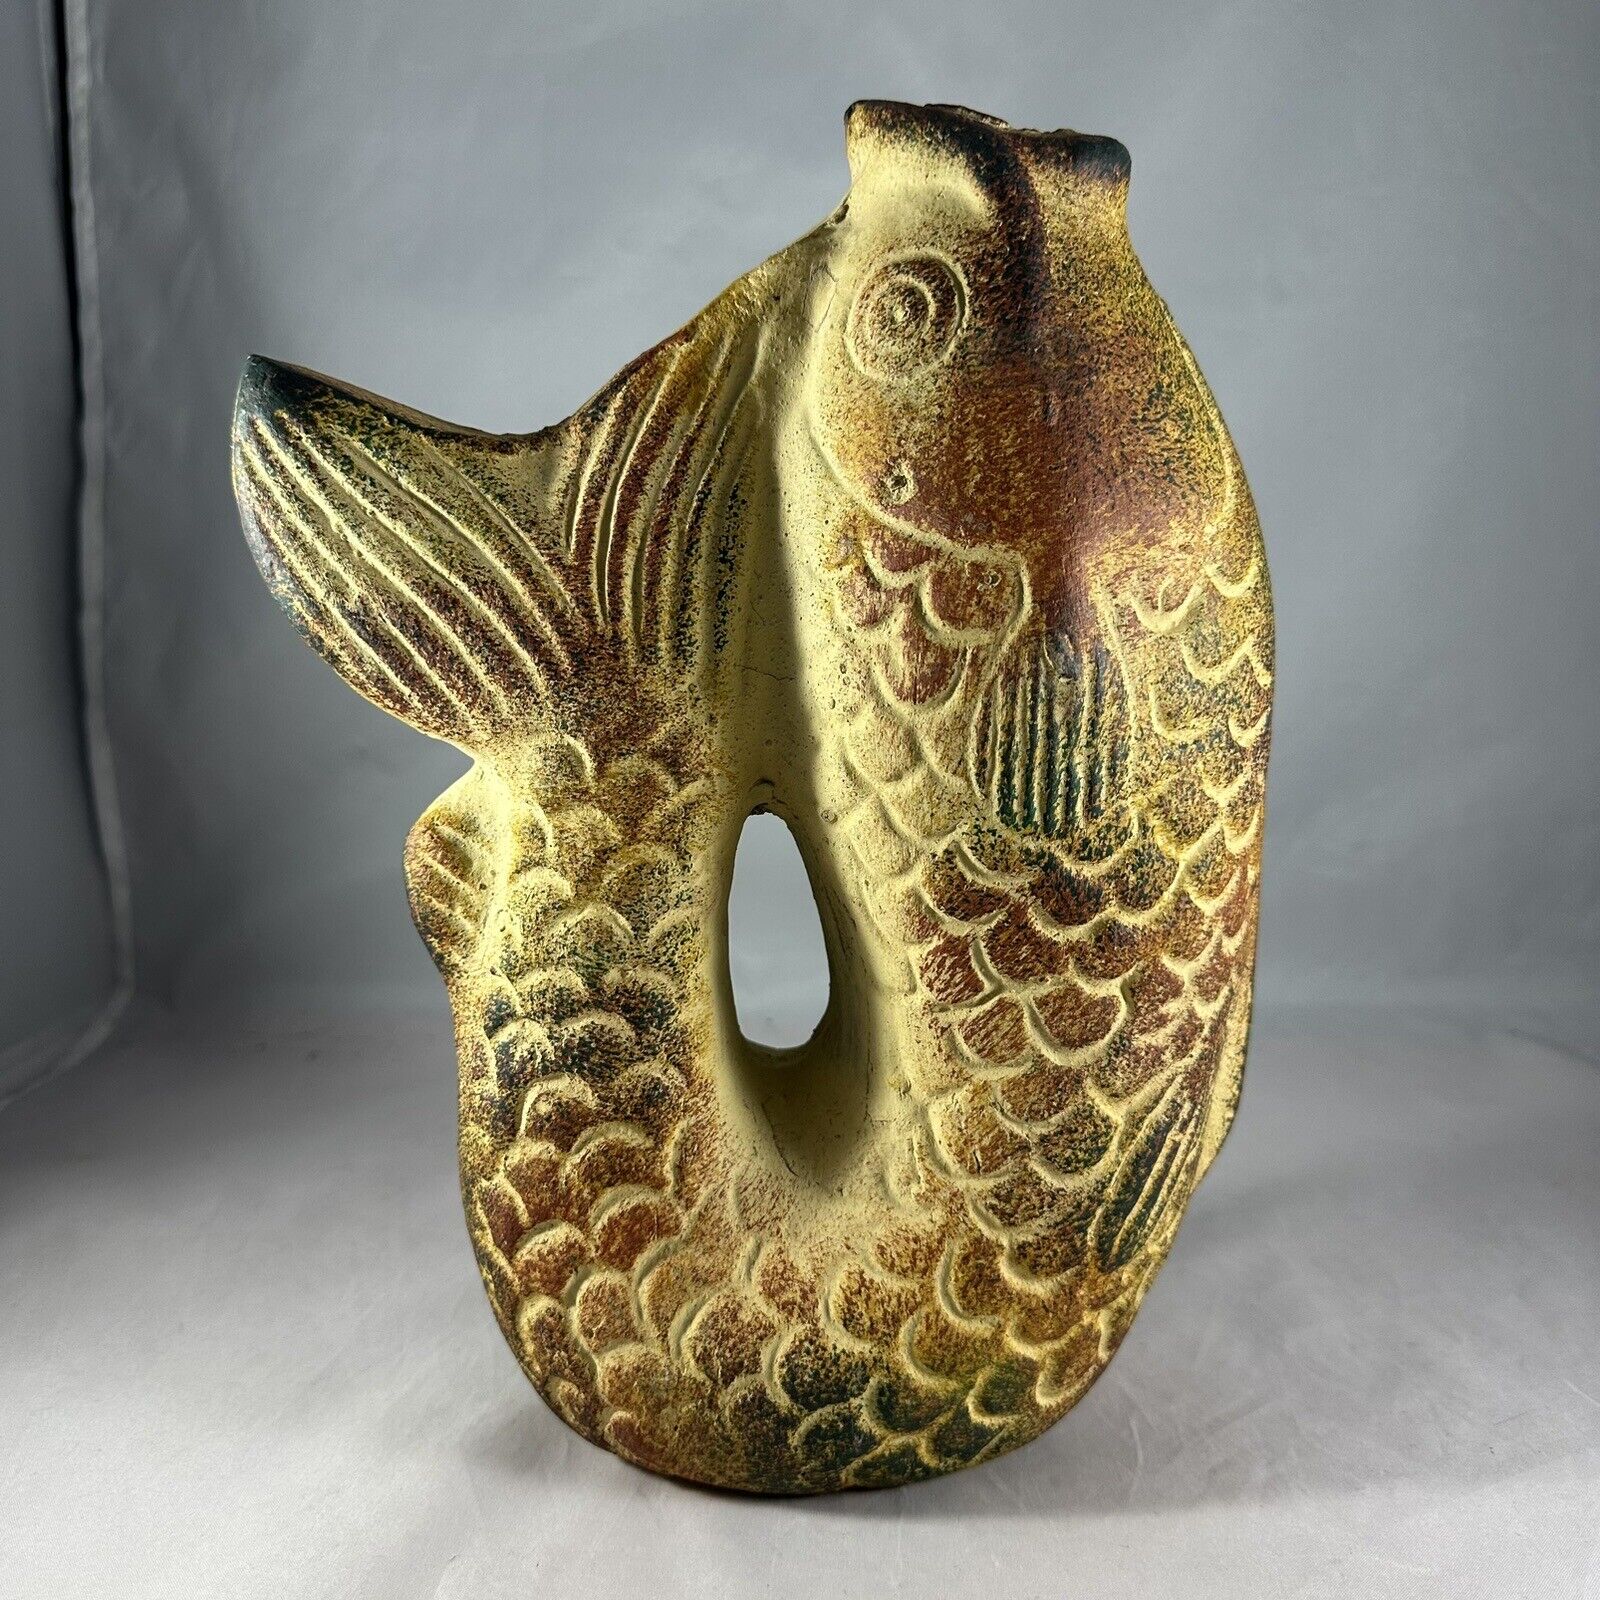 Modern Pottery Fish Pitcher Jug Dry Brush Mottled Paint Technique On Surface